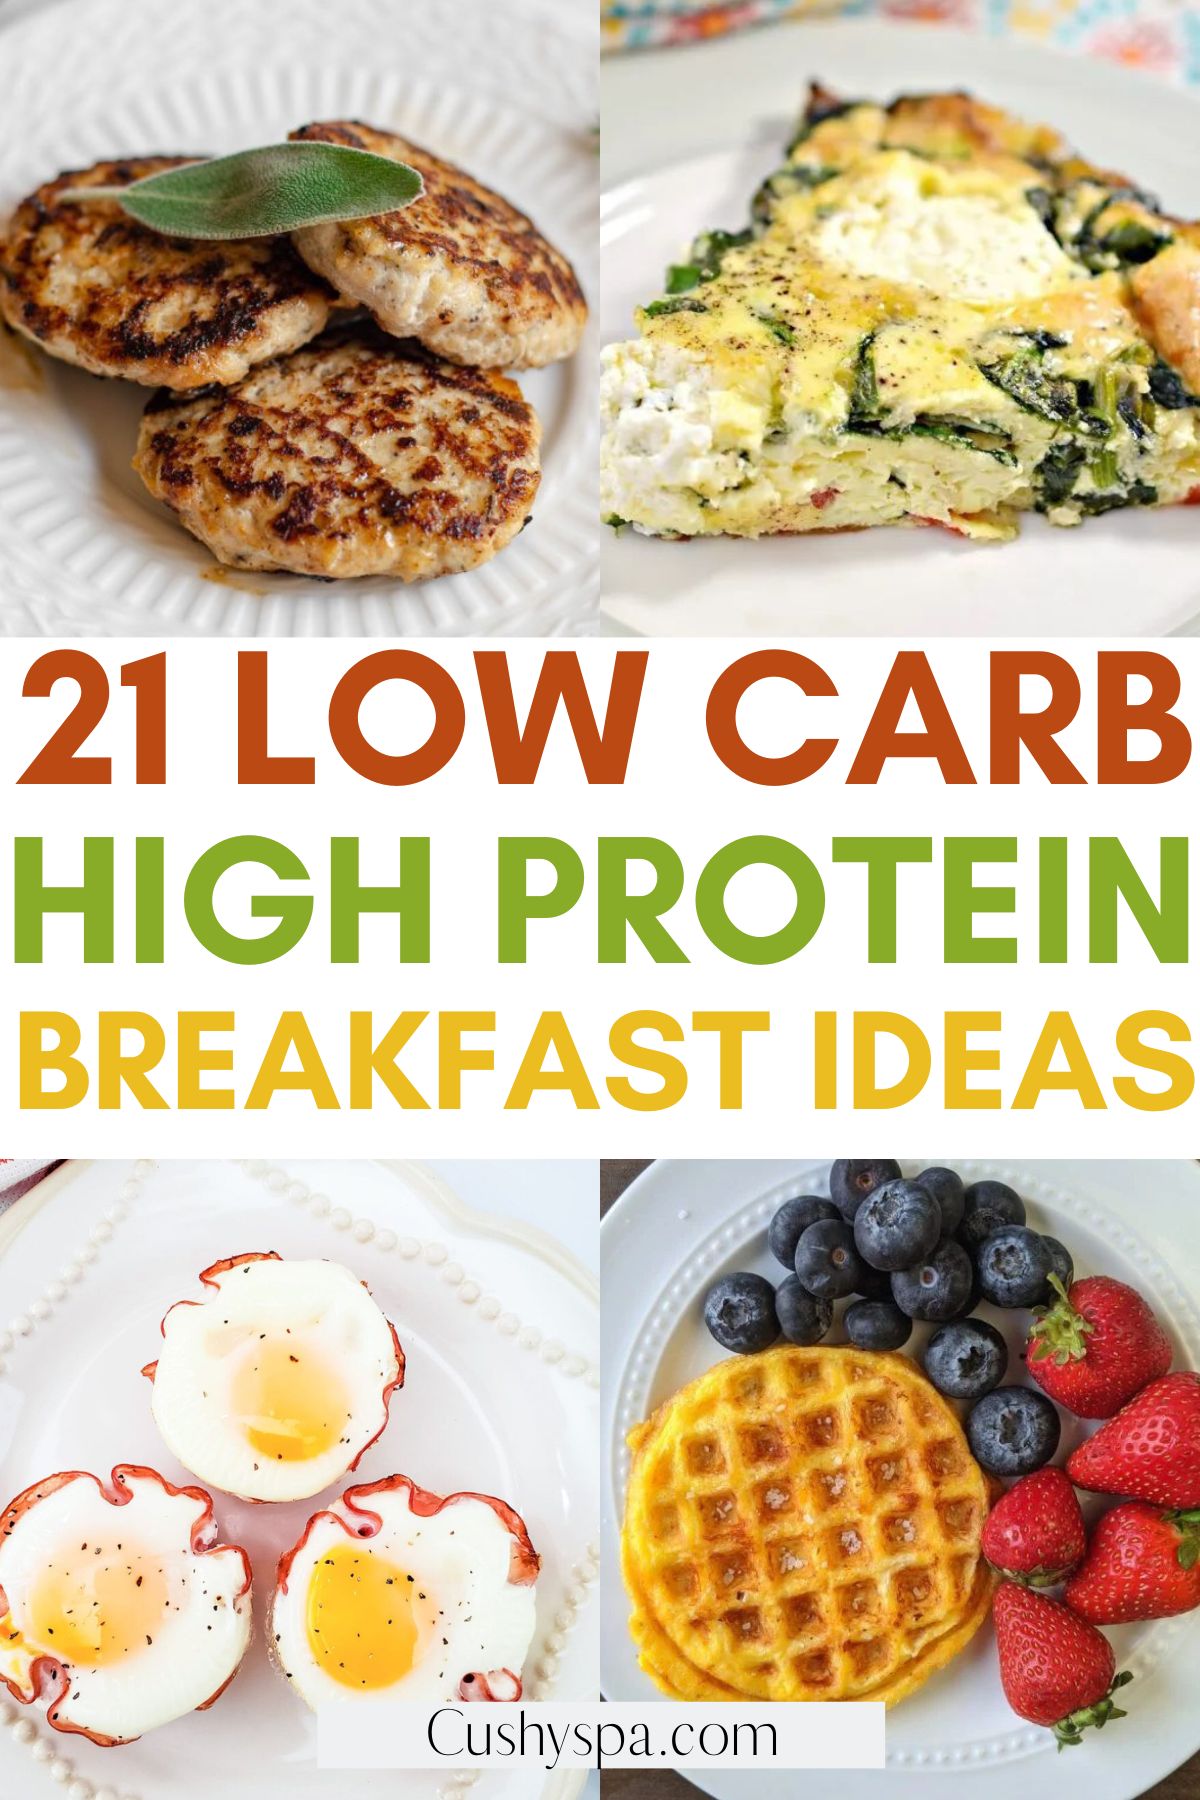 Low Carb High Protein Breakfast Ideas